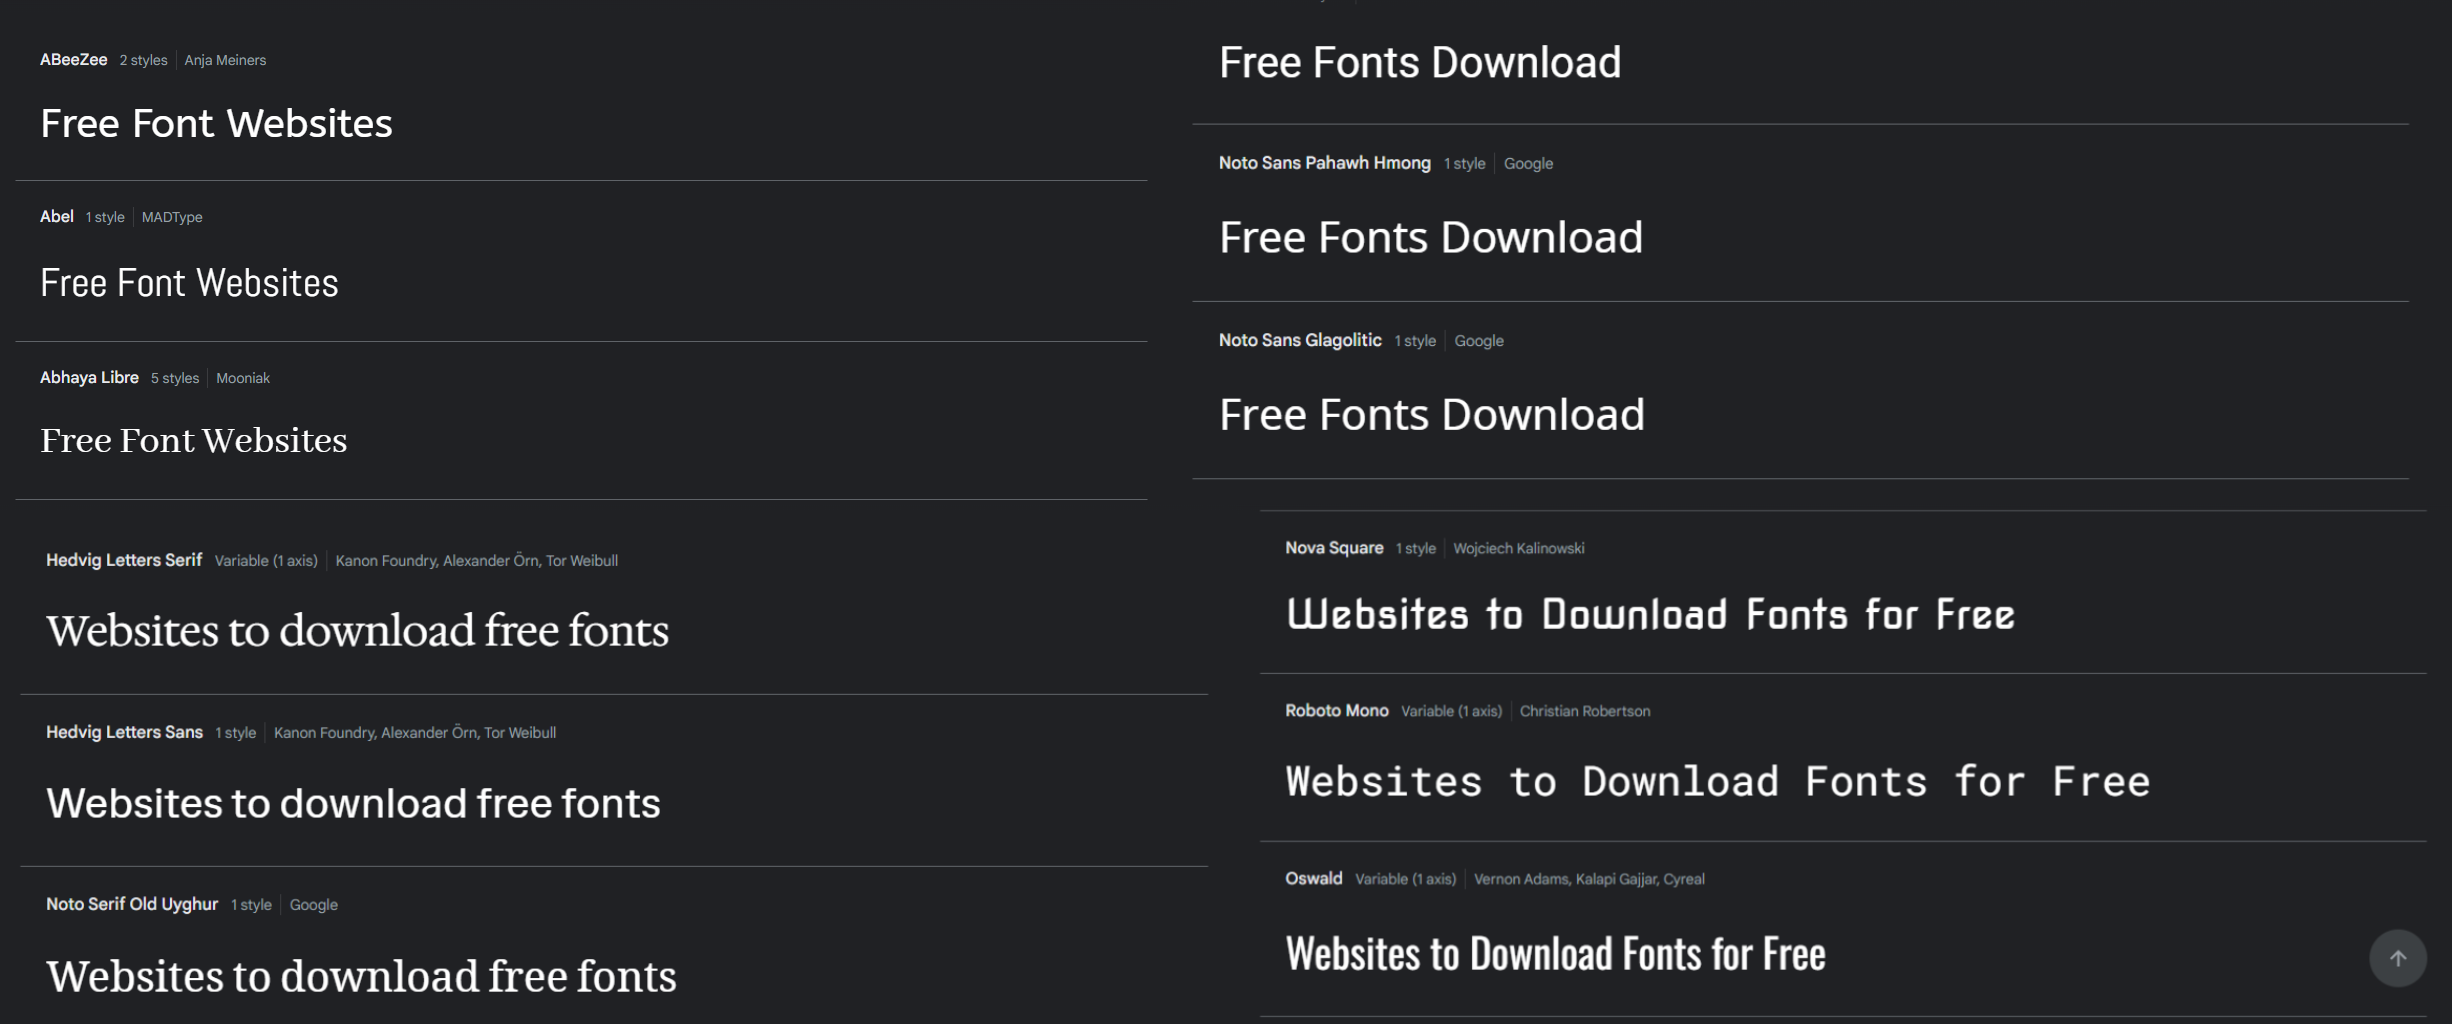 Websites to Download Fonts for Free